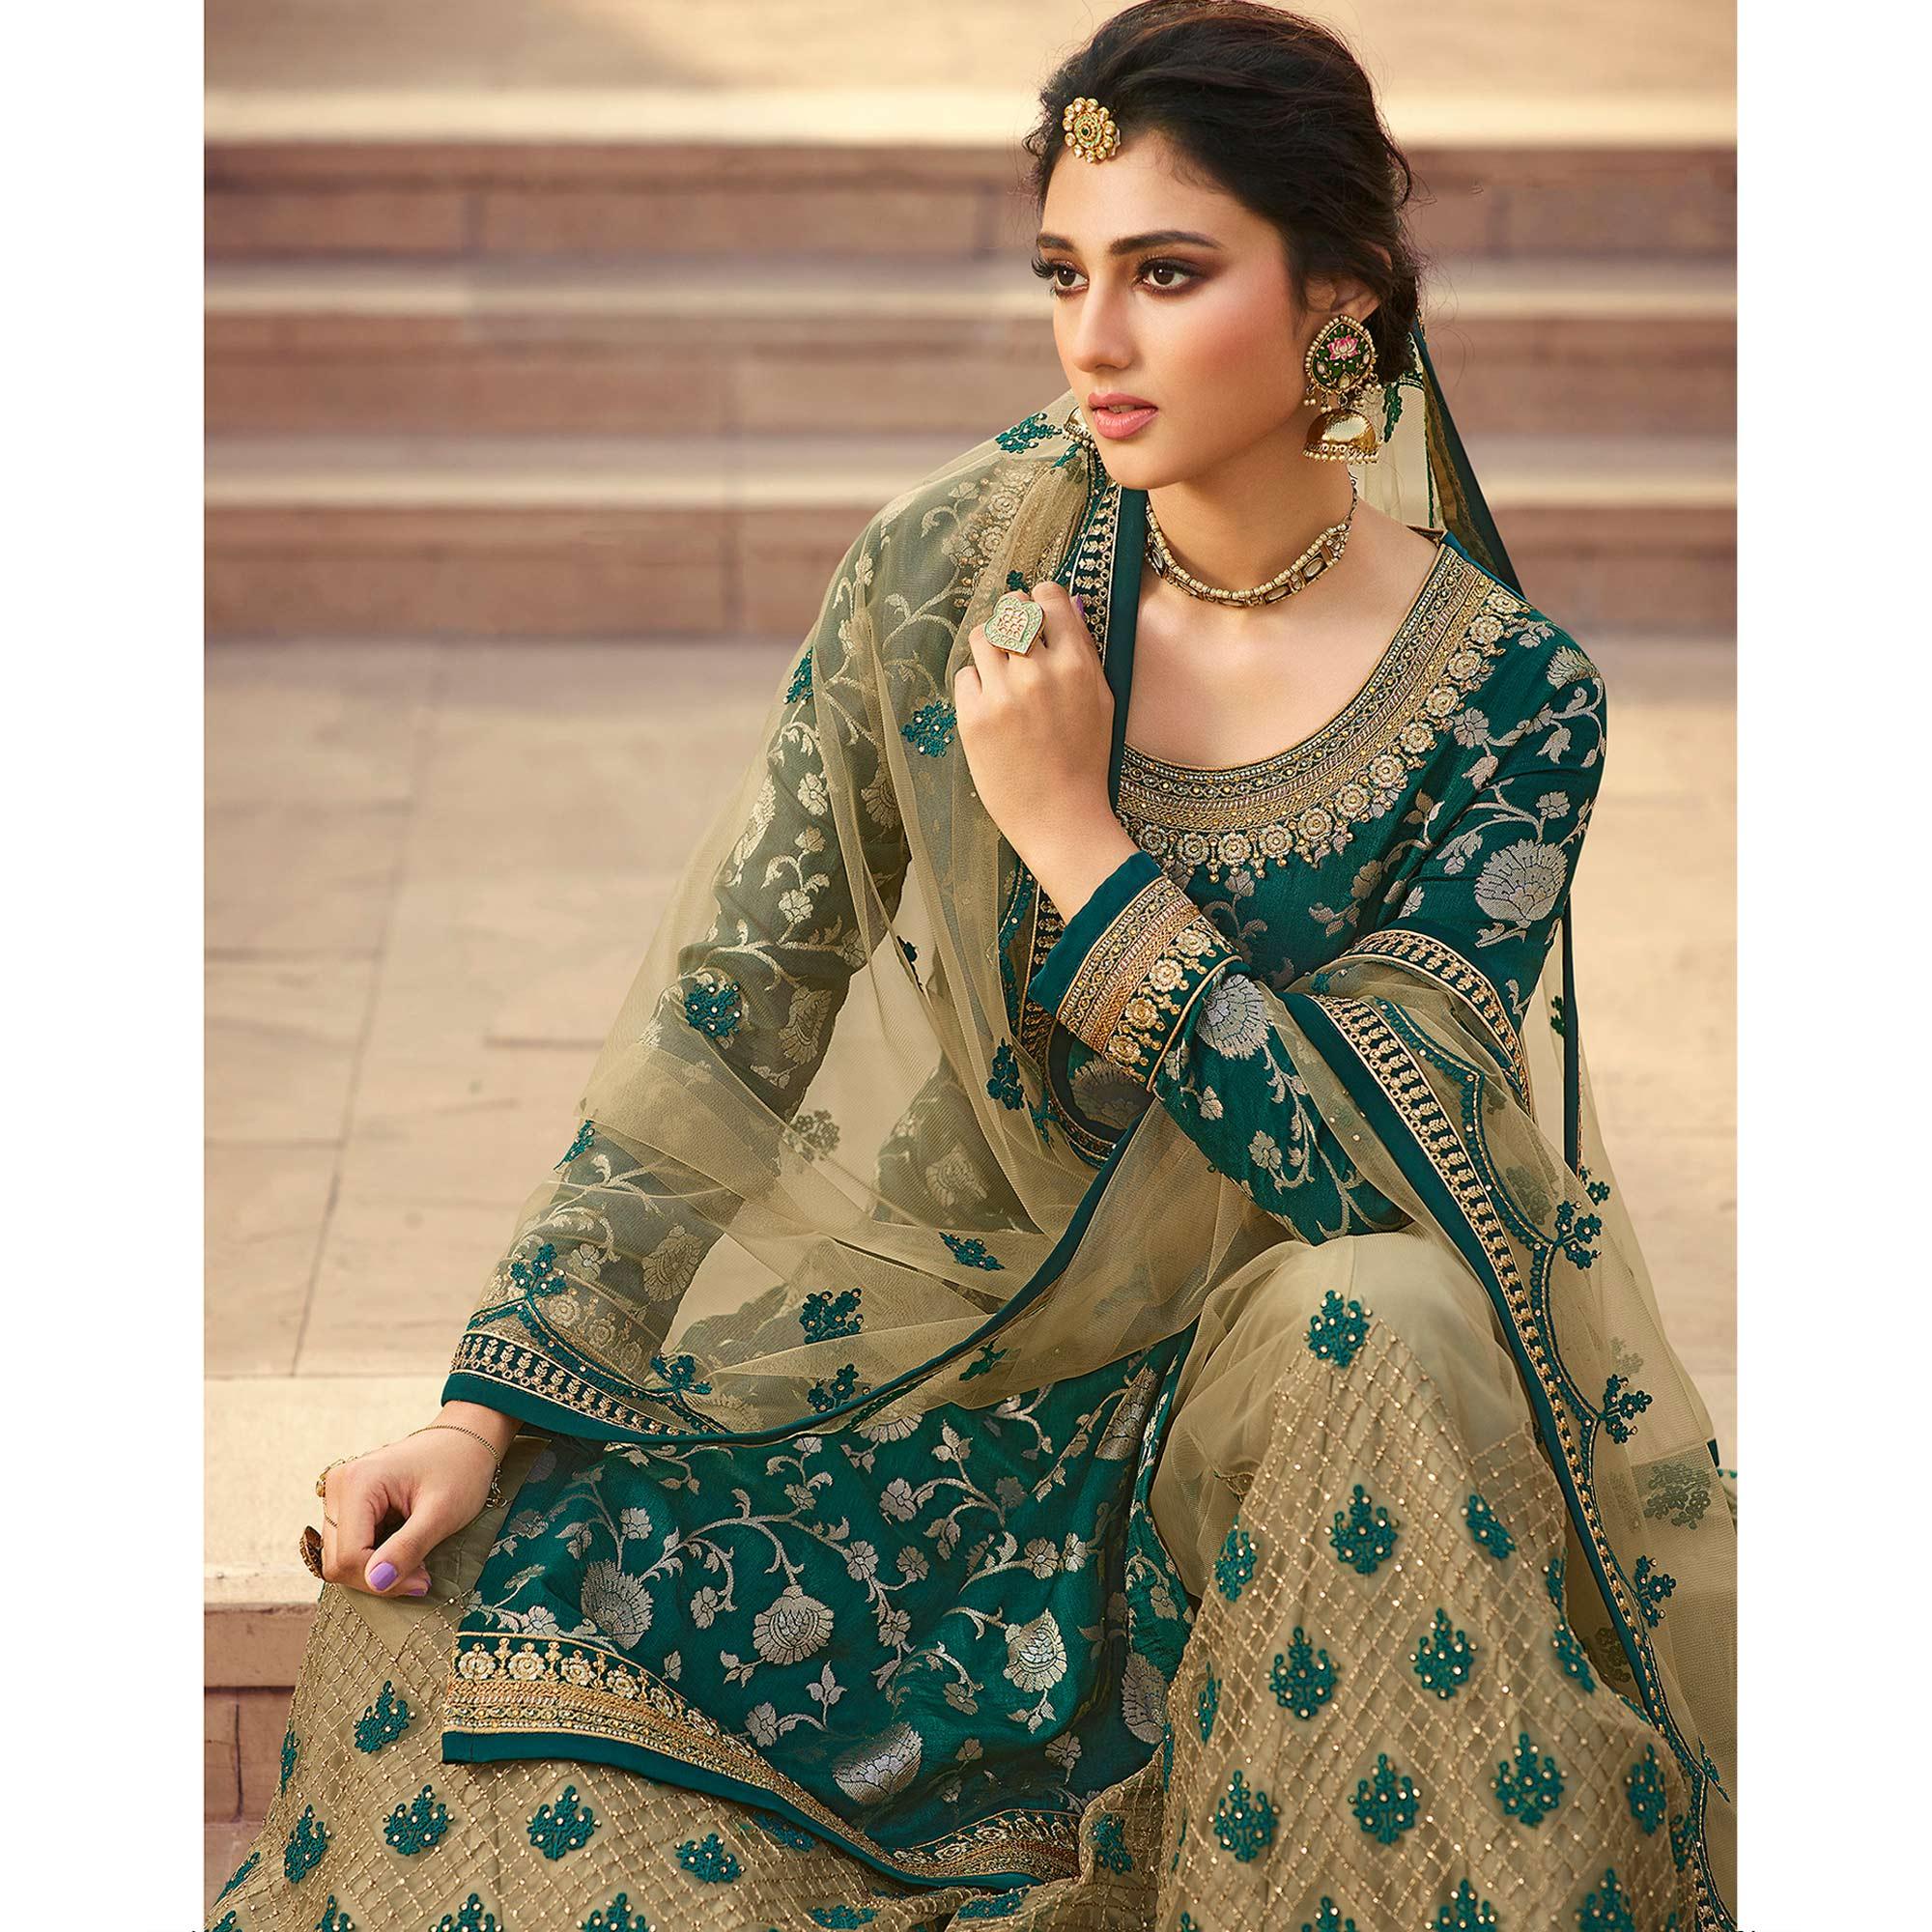 Partywear Designer Floral Embroidery Work Green Dola Jaquard Silk Plazzo Suit - Peachmode